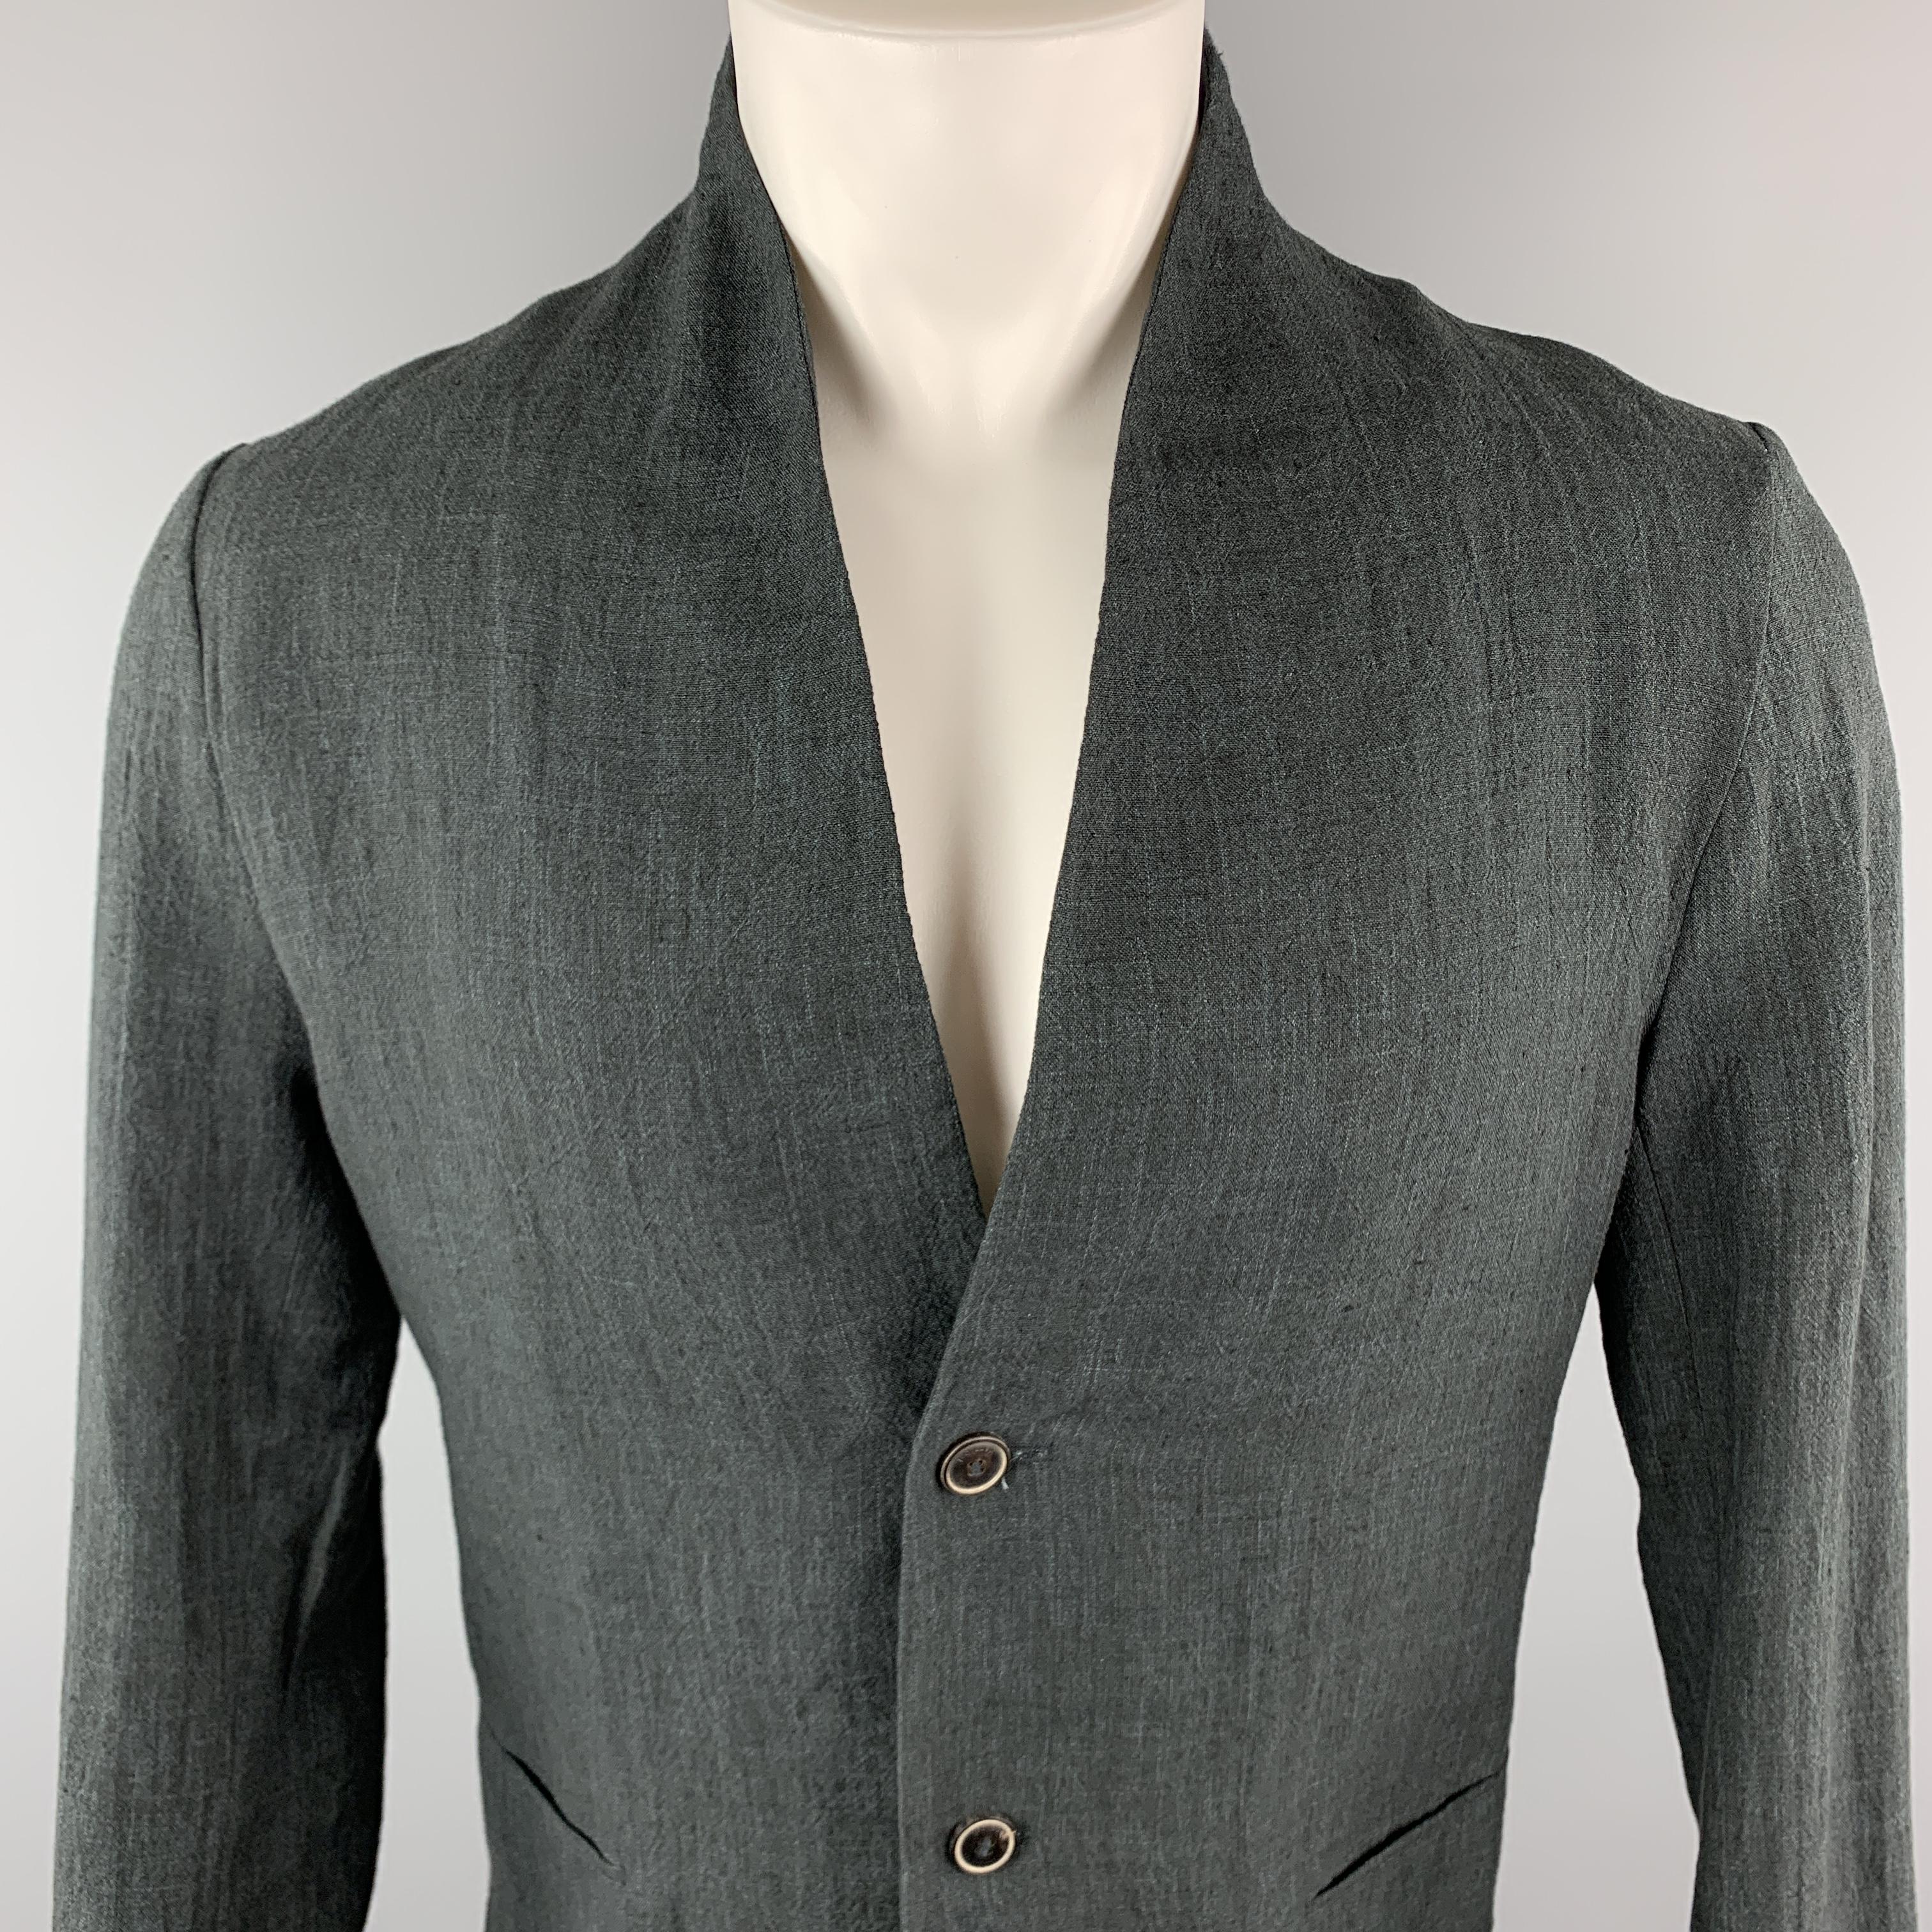 HANNIBAL Jacket comes in a charcoal tone in a solid linen material, with a shawl collar, slit pockets, 2 buttons at closure, single breasted, a single button at cuff, internal pockets and a single vent at back. Made in Germany.

Excellent Pre-Owned